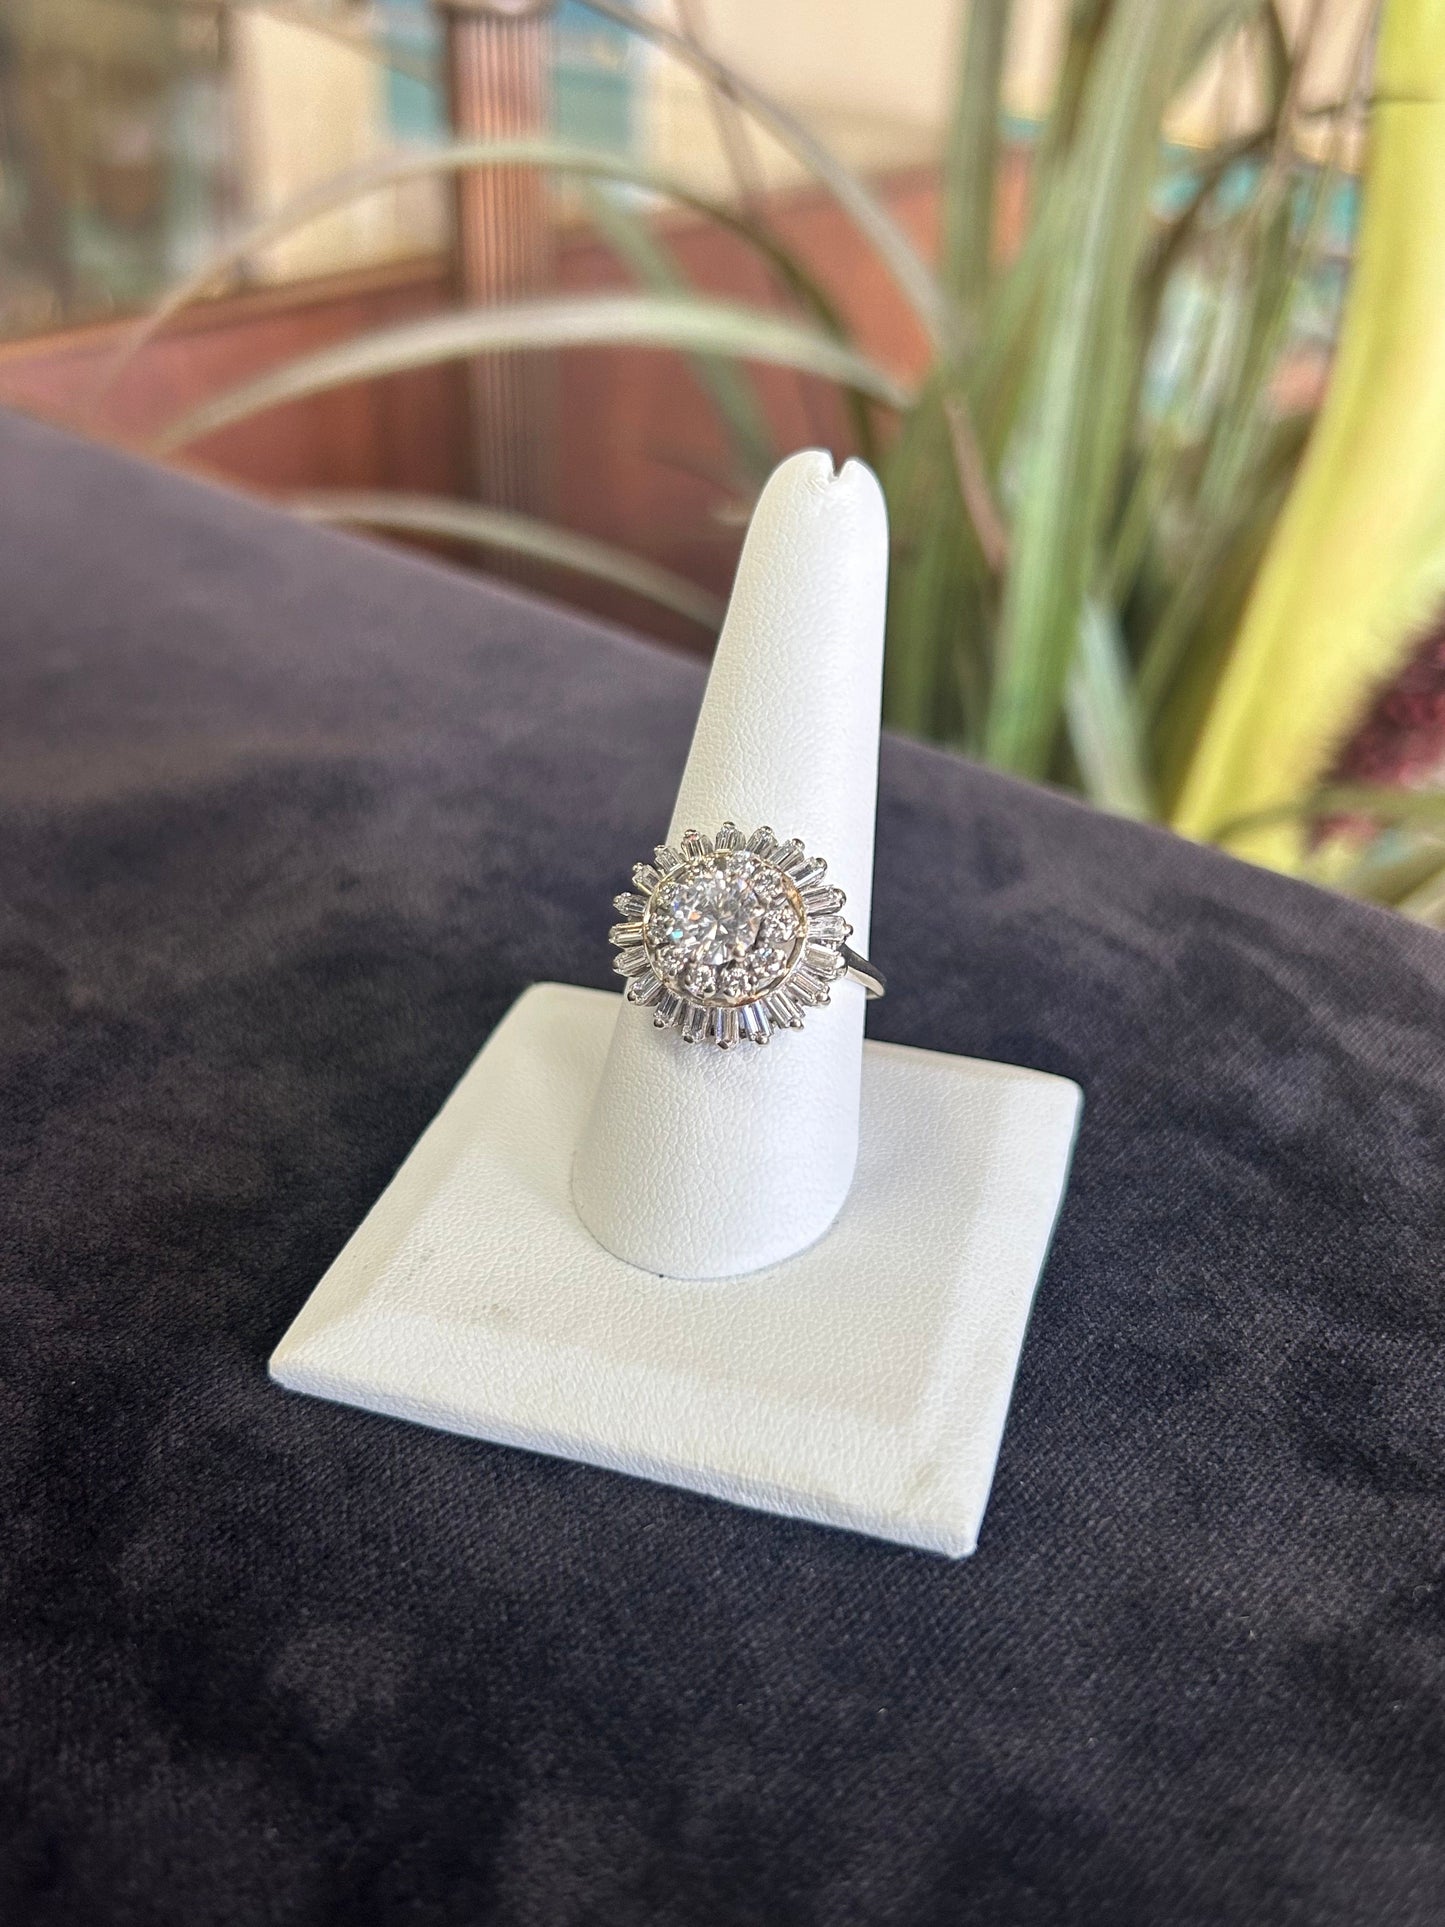 a close up of a ring on a napkin